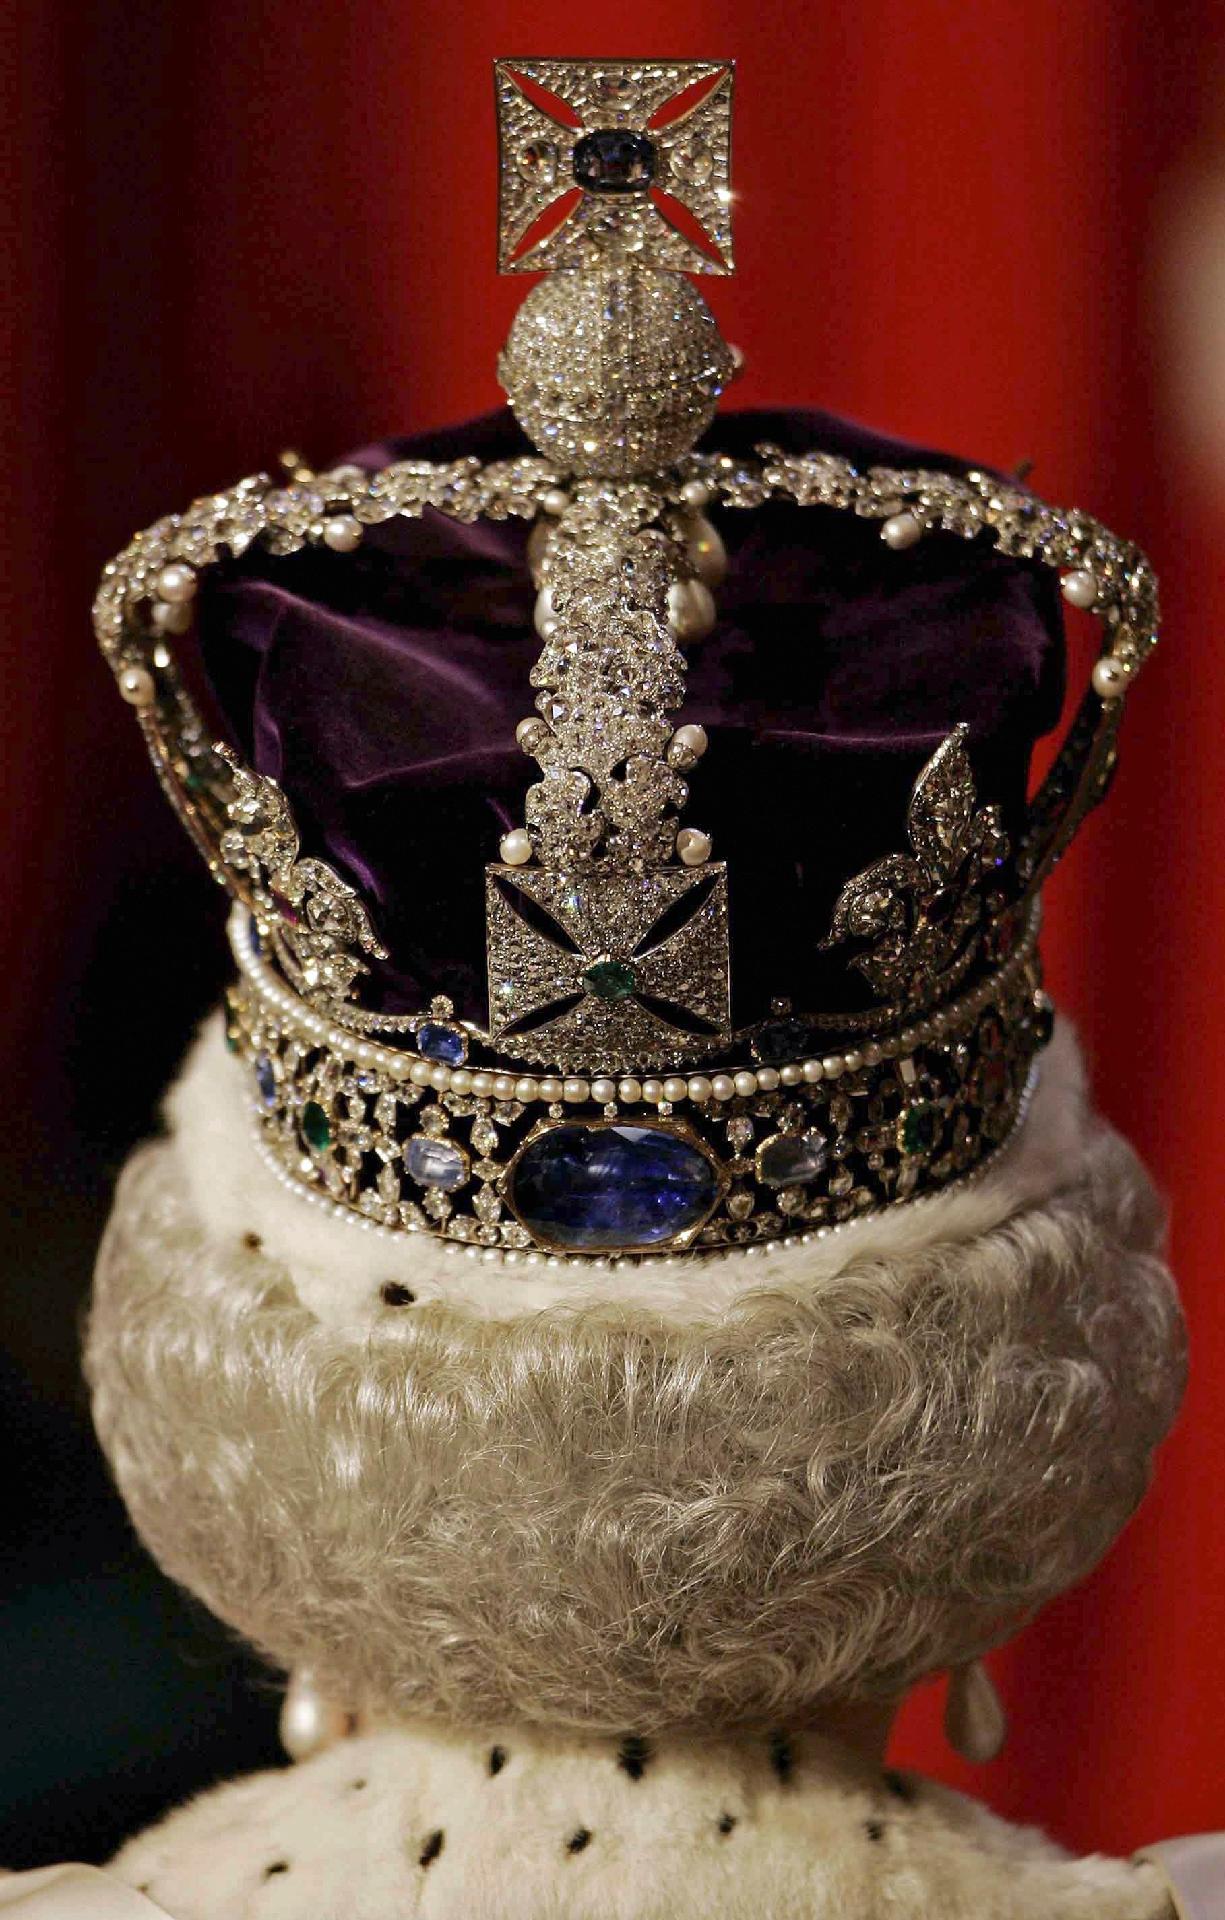 Detail of Queen Elizabeth II's crown at an event in 2004 - Getty Images